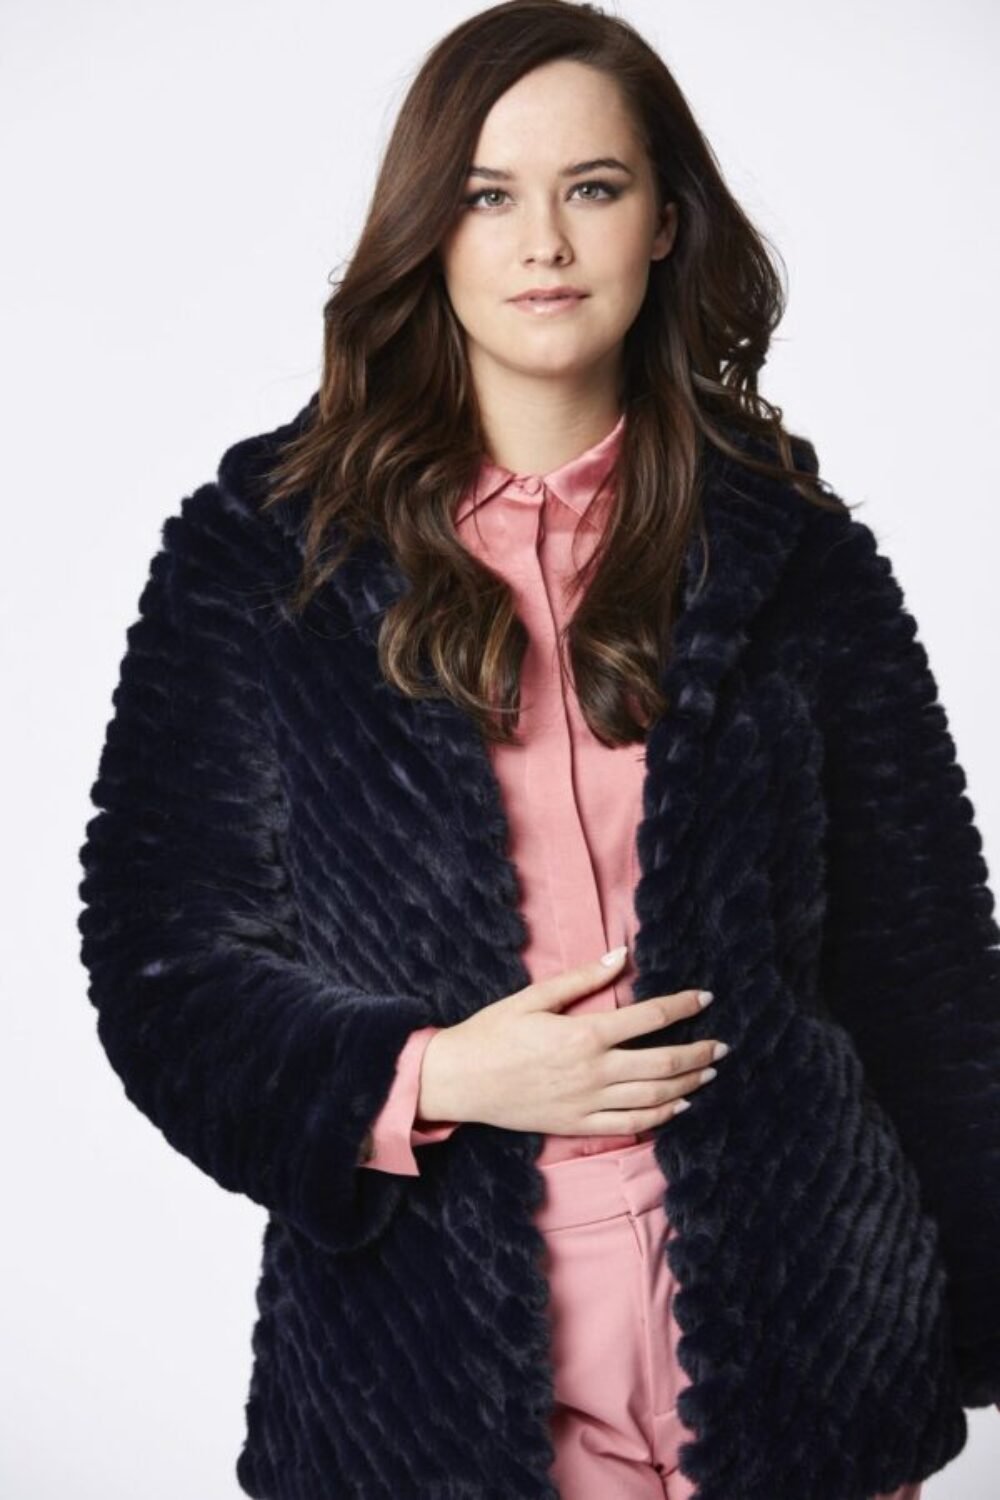 Shop Lux Navy Faux Fur Jacket and women's luxury and designer clothes at www.lux-apparel.co.uk